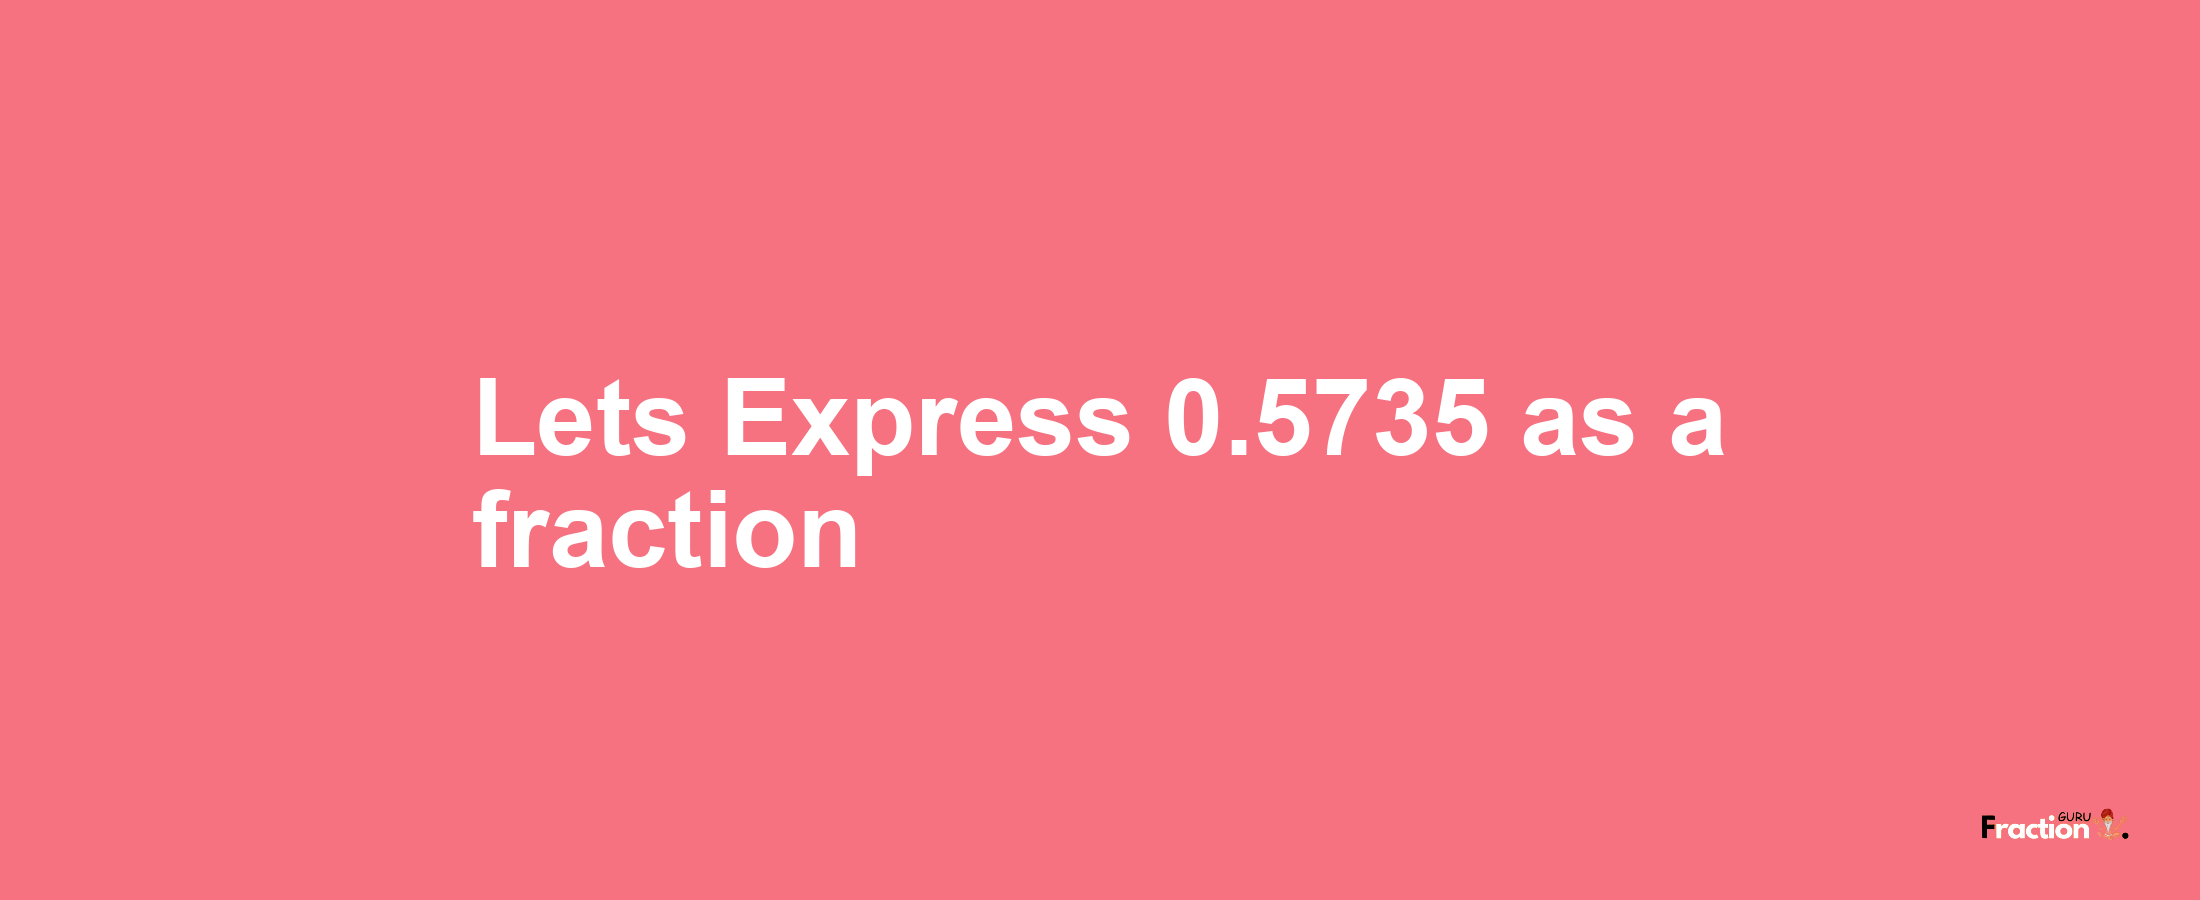 Lets Express 0.5735 as afraction